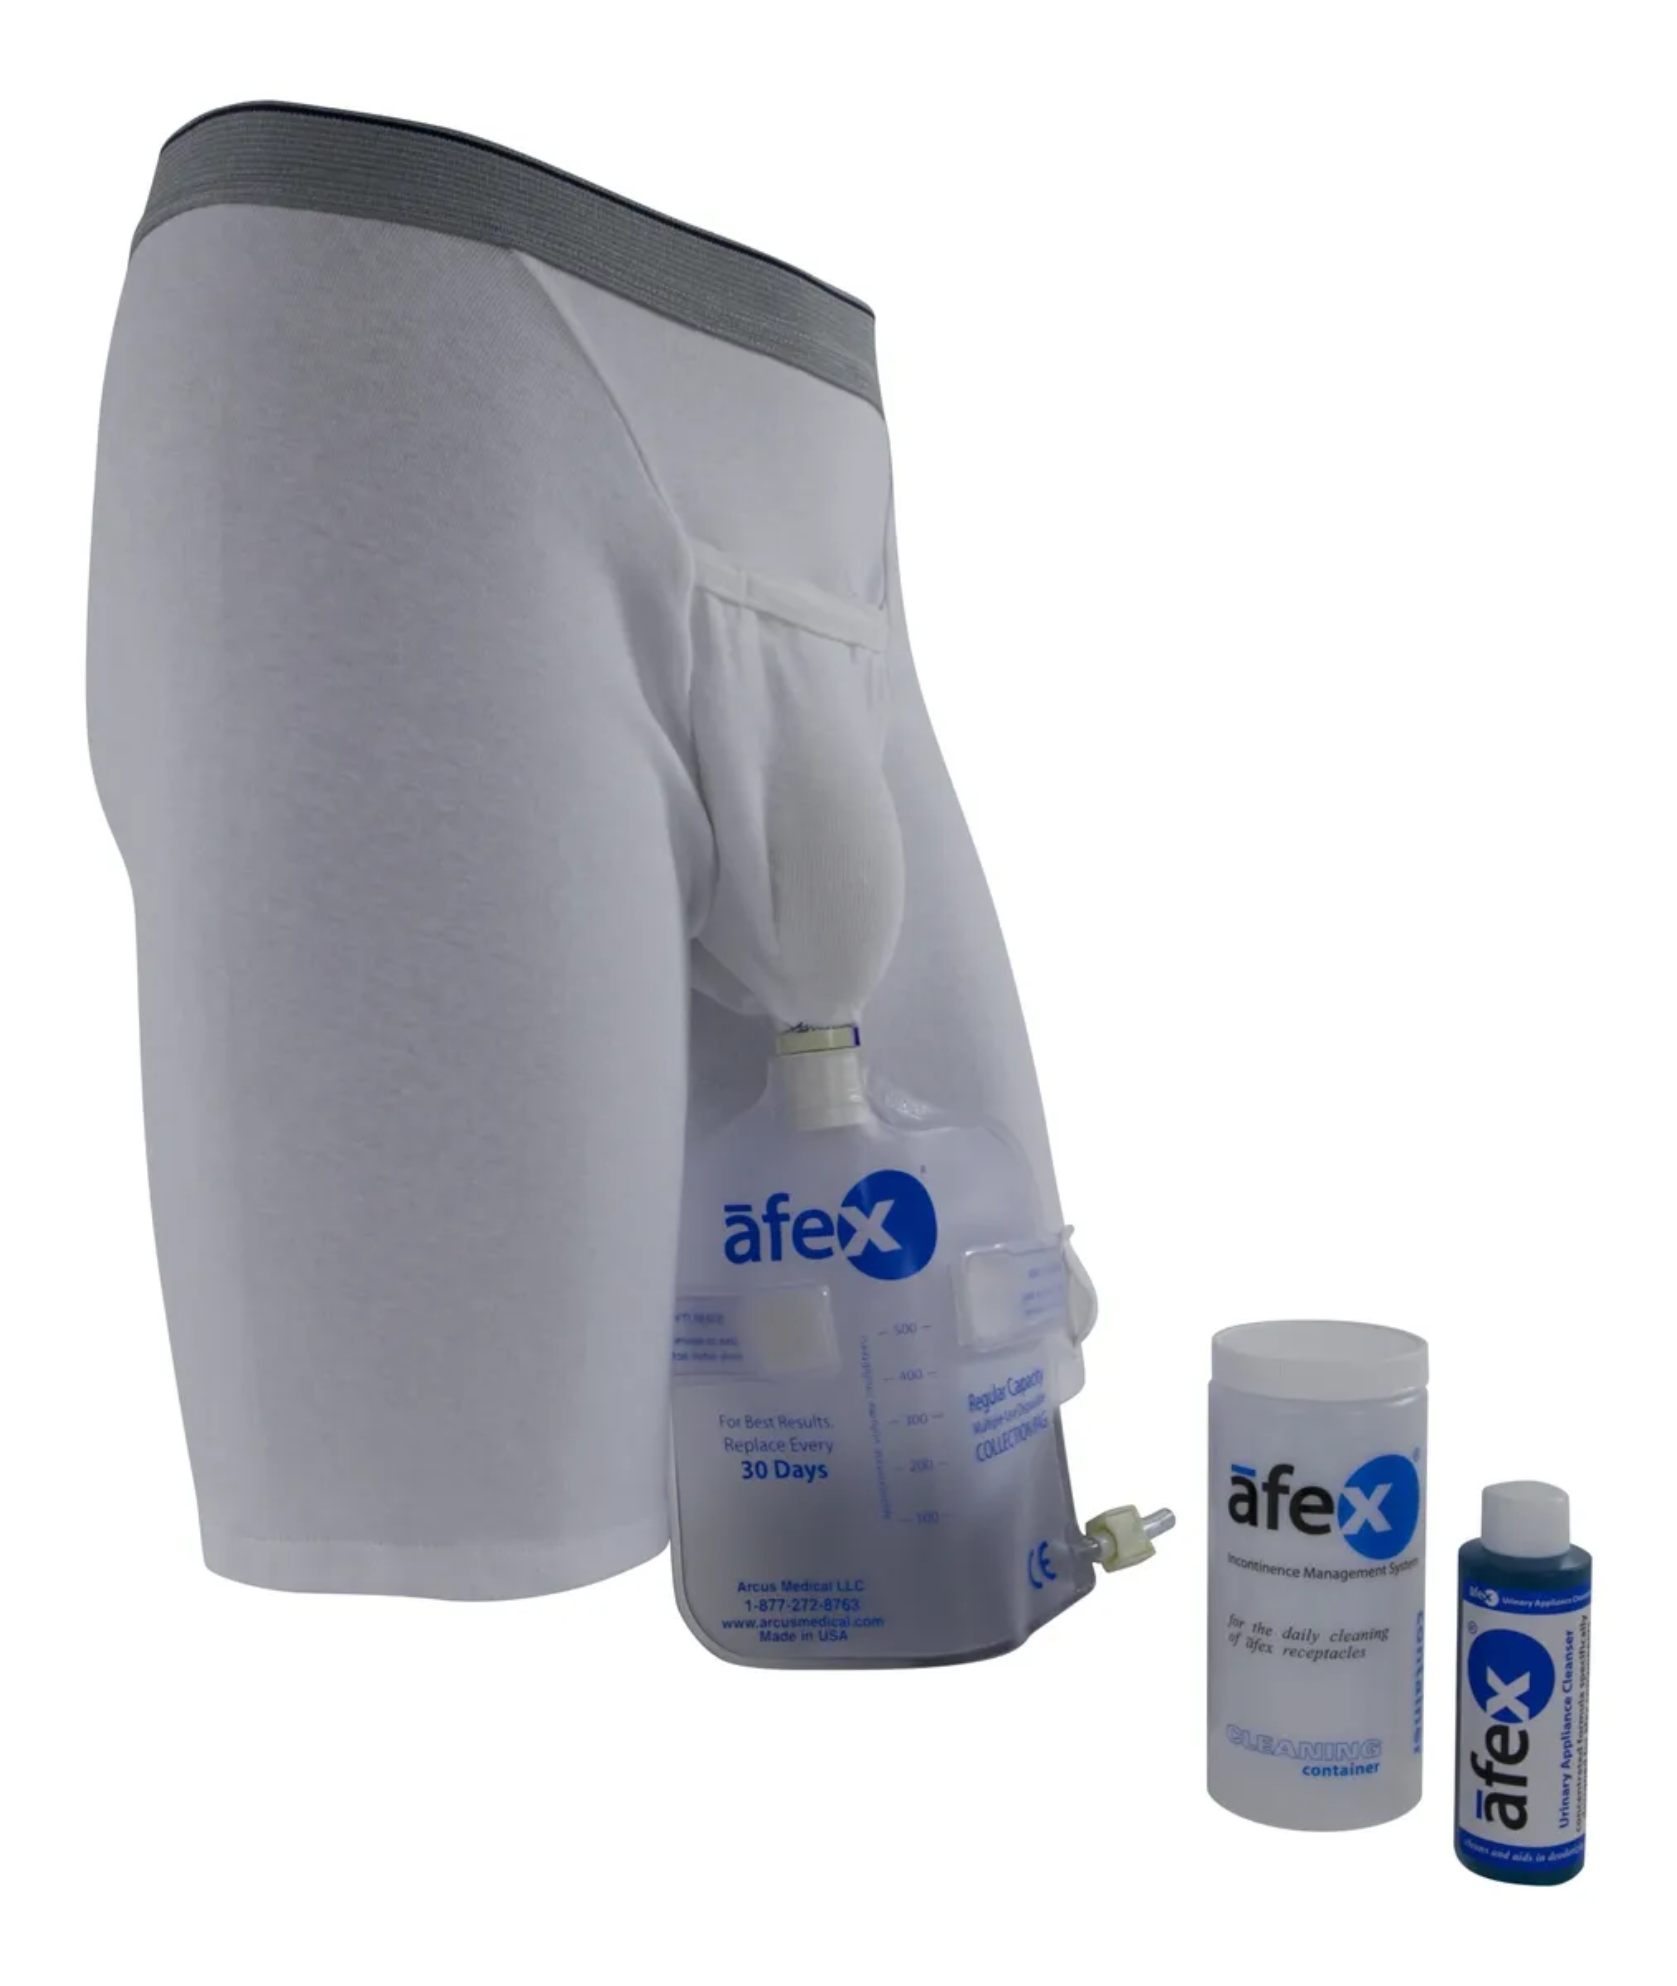 Afex Incontinence Management System Starter Kit - Low Style for Limited Mobility